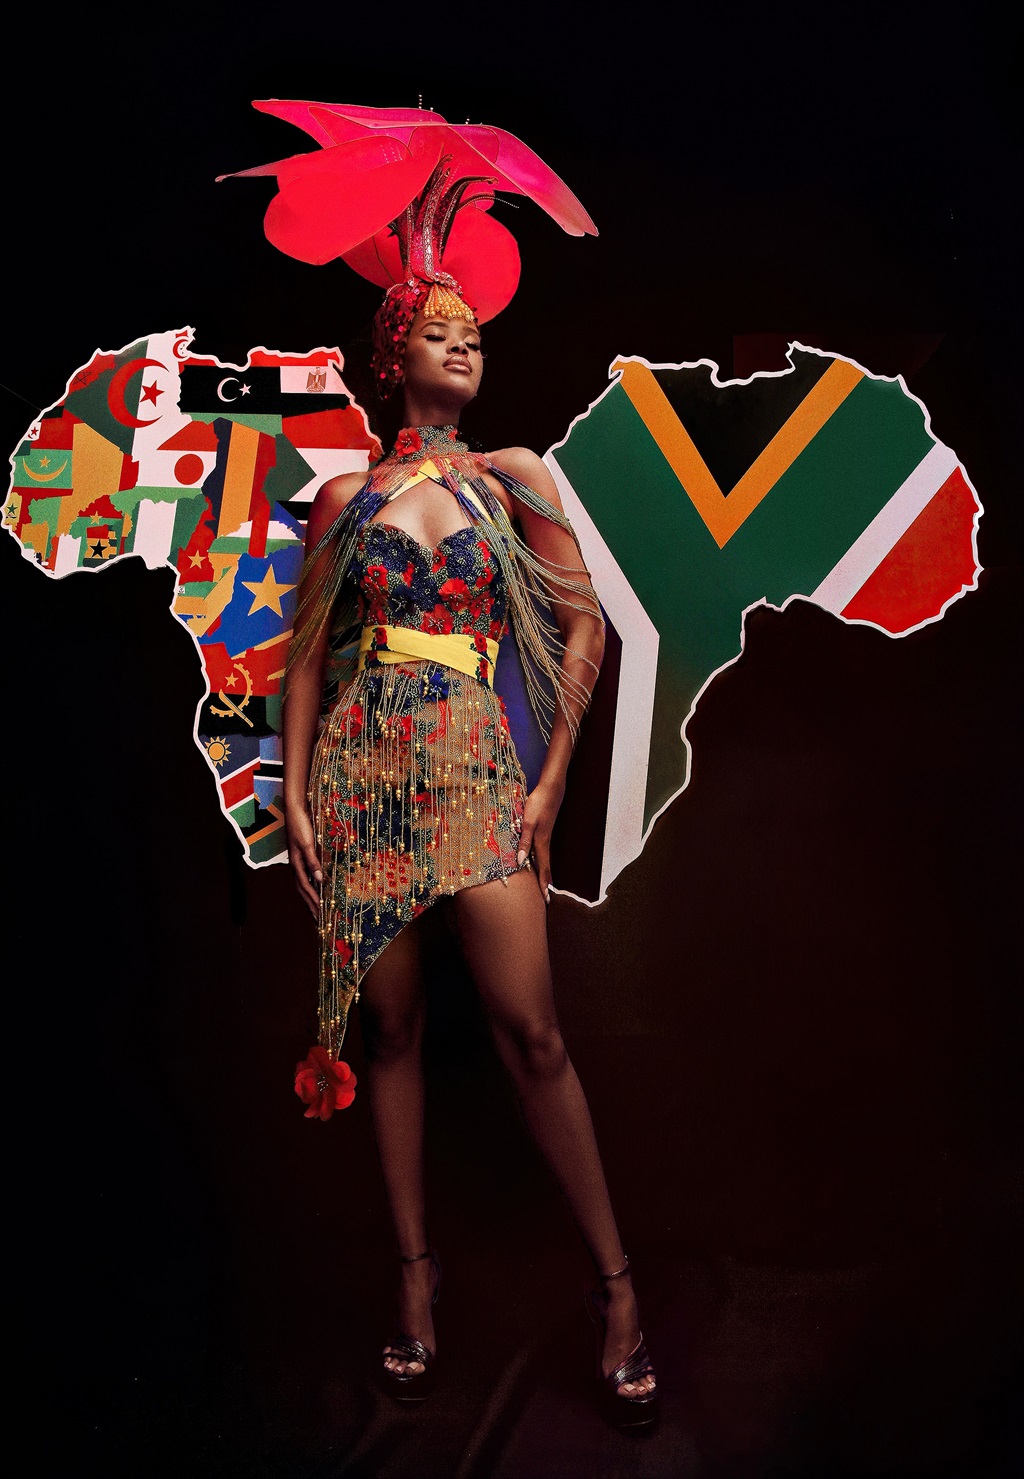 Meet all the African contestants at the 71st Miss Universe Beauty